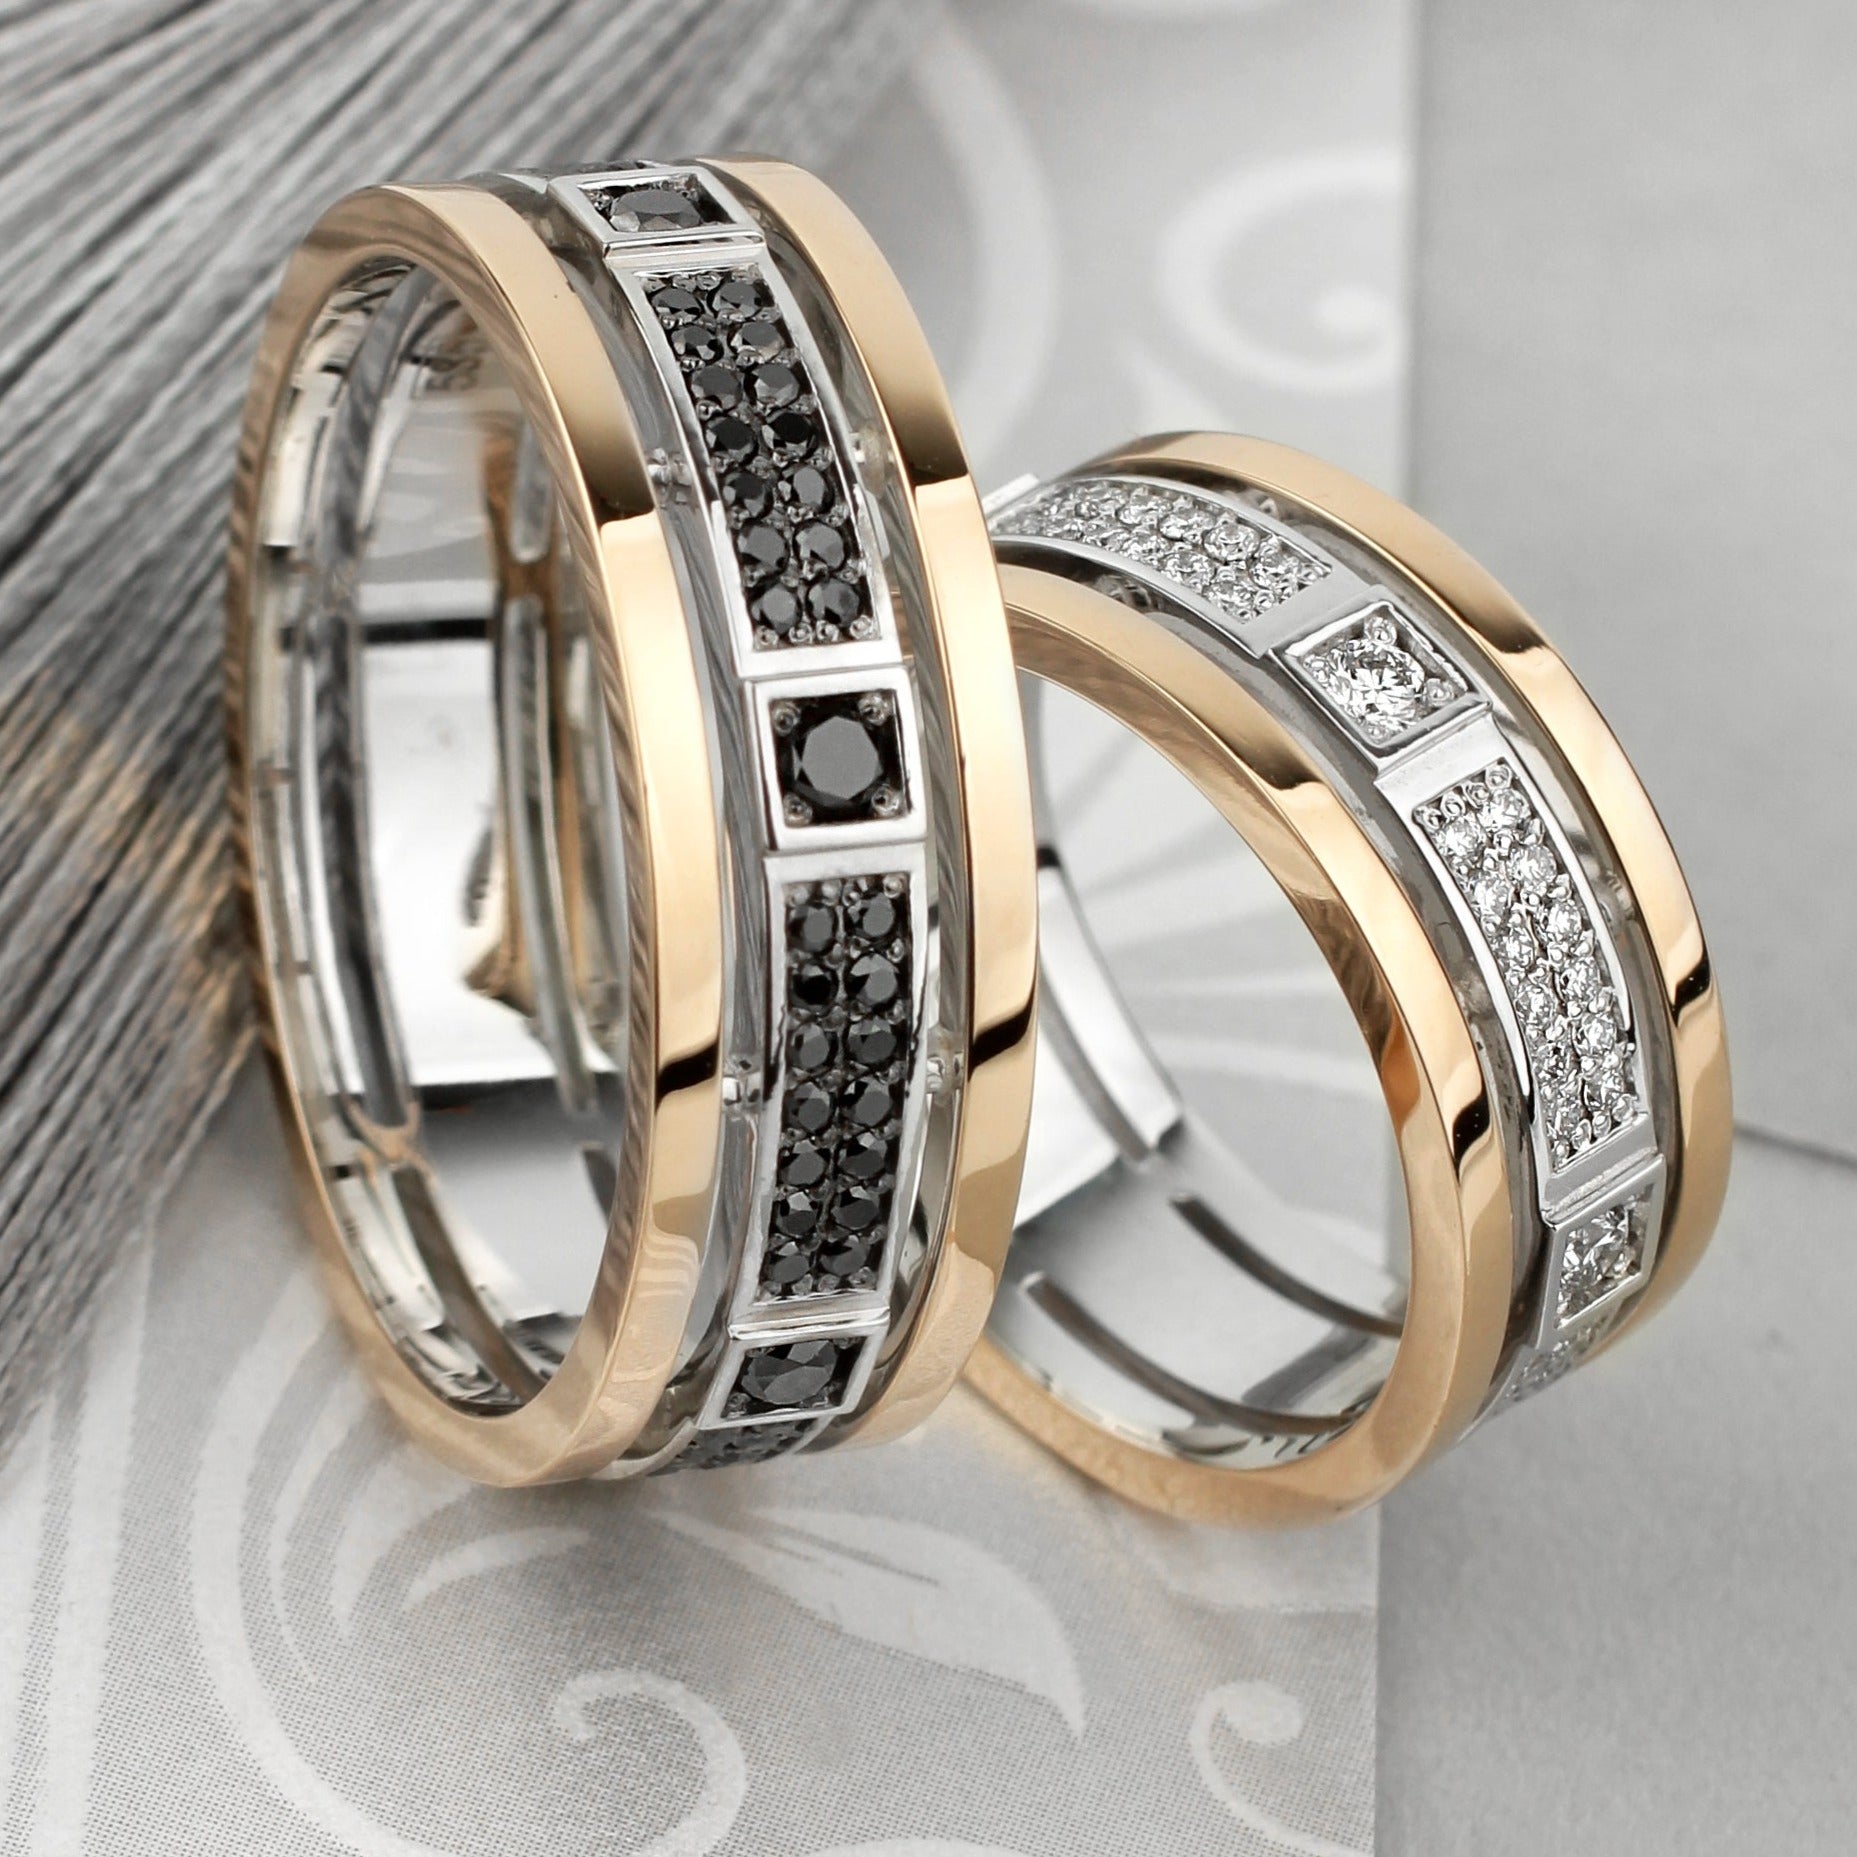 Gold wedding bands with black and white diamonds. Unique wedding bands set. His and hers wedding rings. Wide wedding rings. Diamond bands.